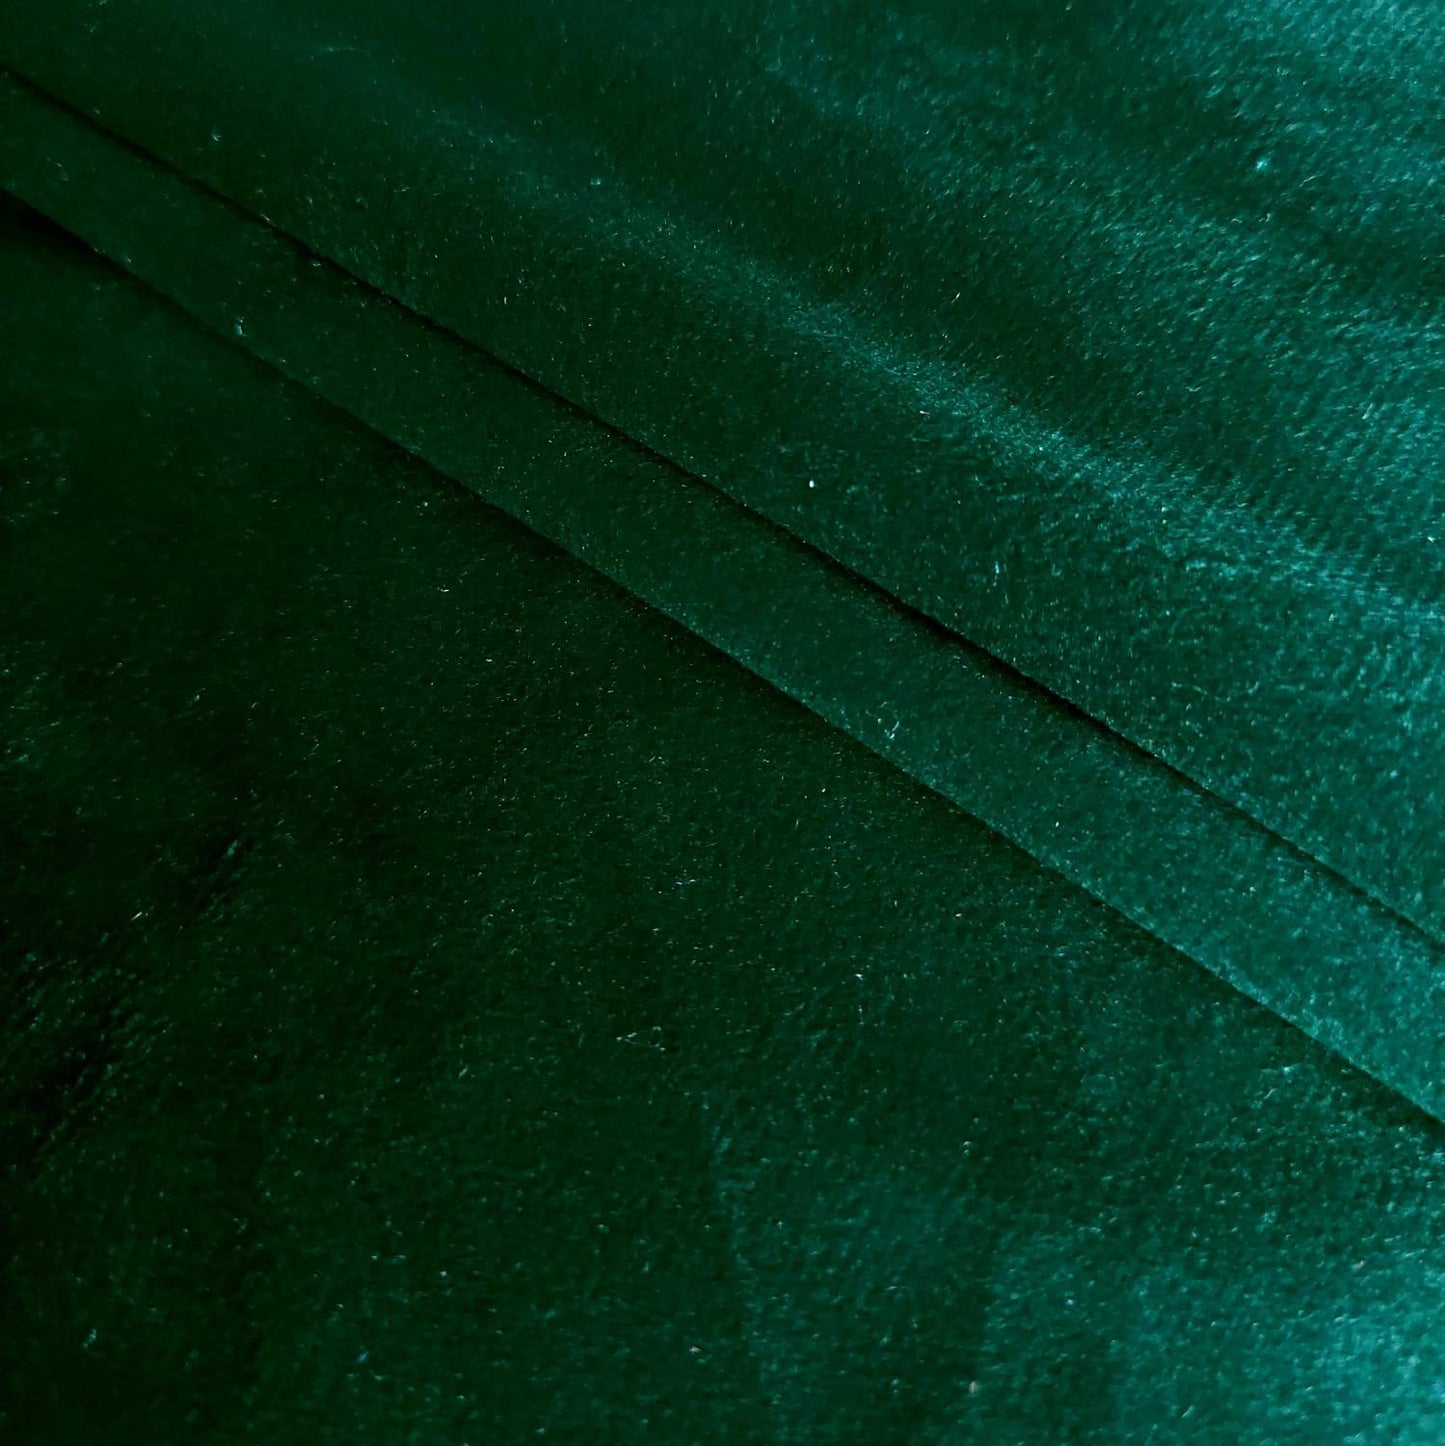 Bowzar Silk Velvet Solid Dyed Fabric Soft Smooth Cloth for Sofa Furnishing Upholstery